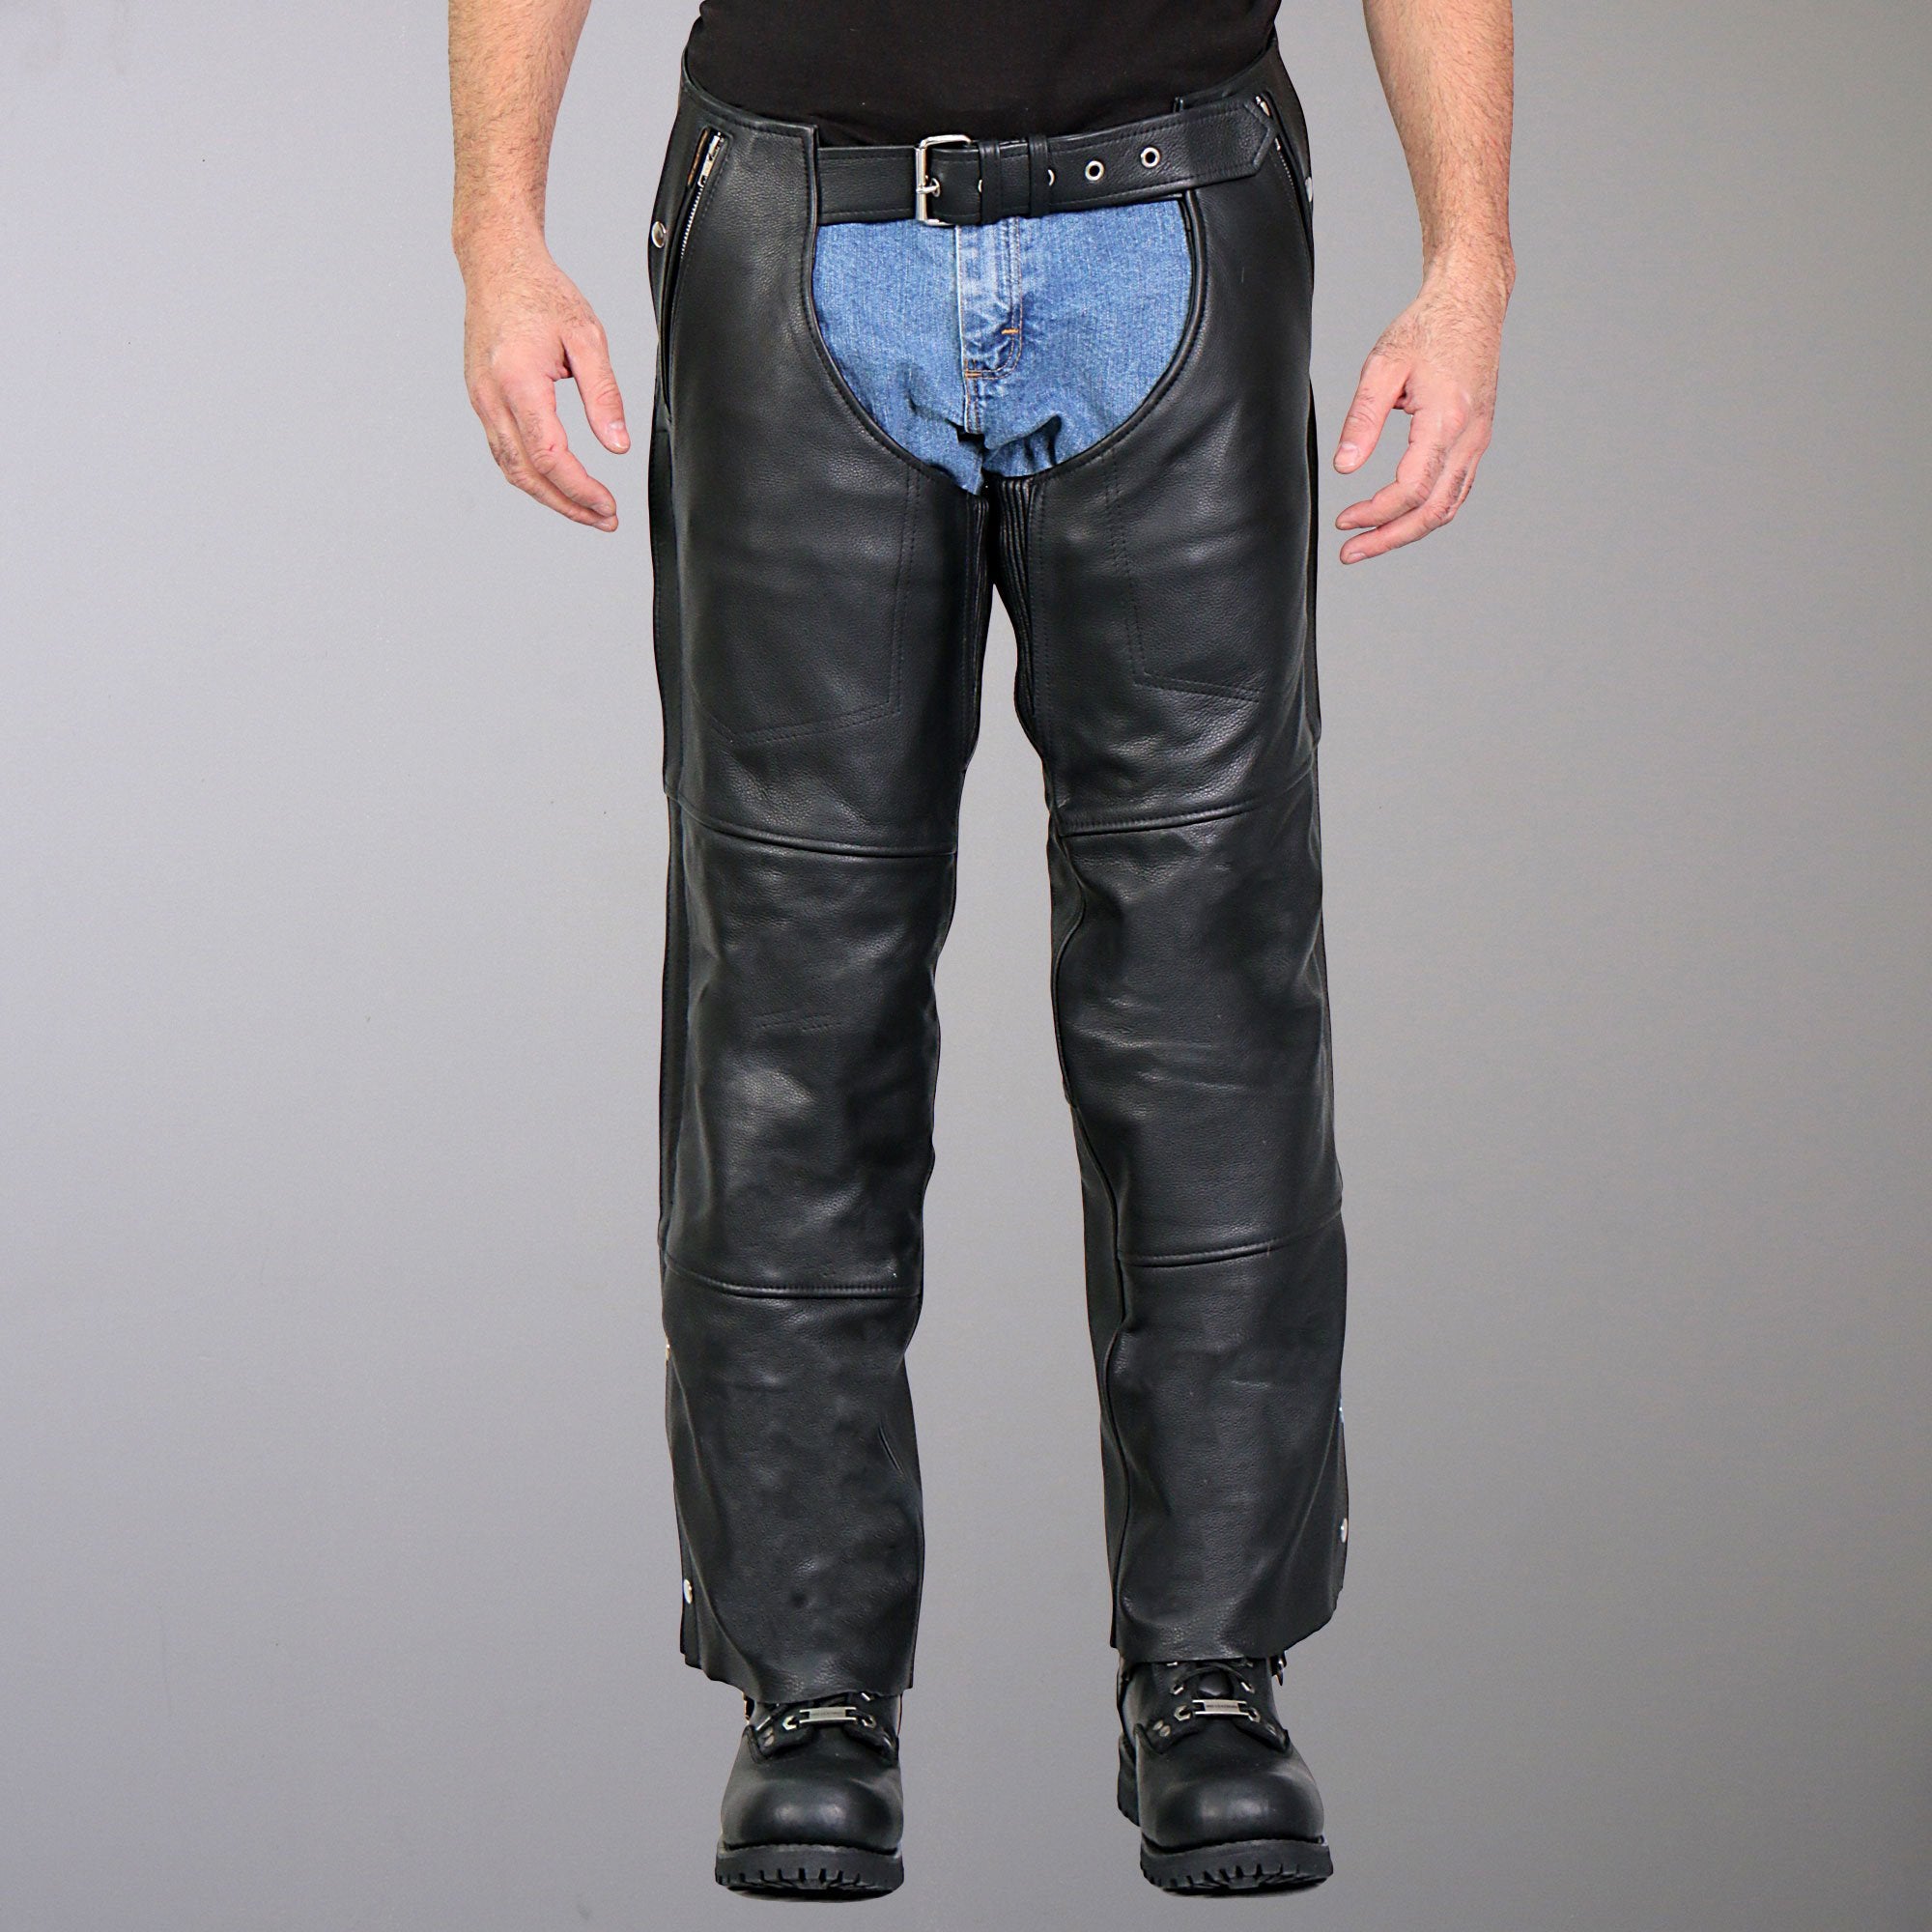 Leather Motorcycle Chaps & Biker Pants - Hot Leathers